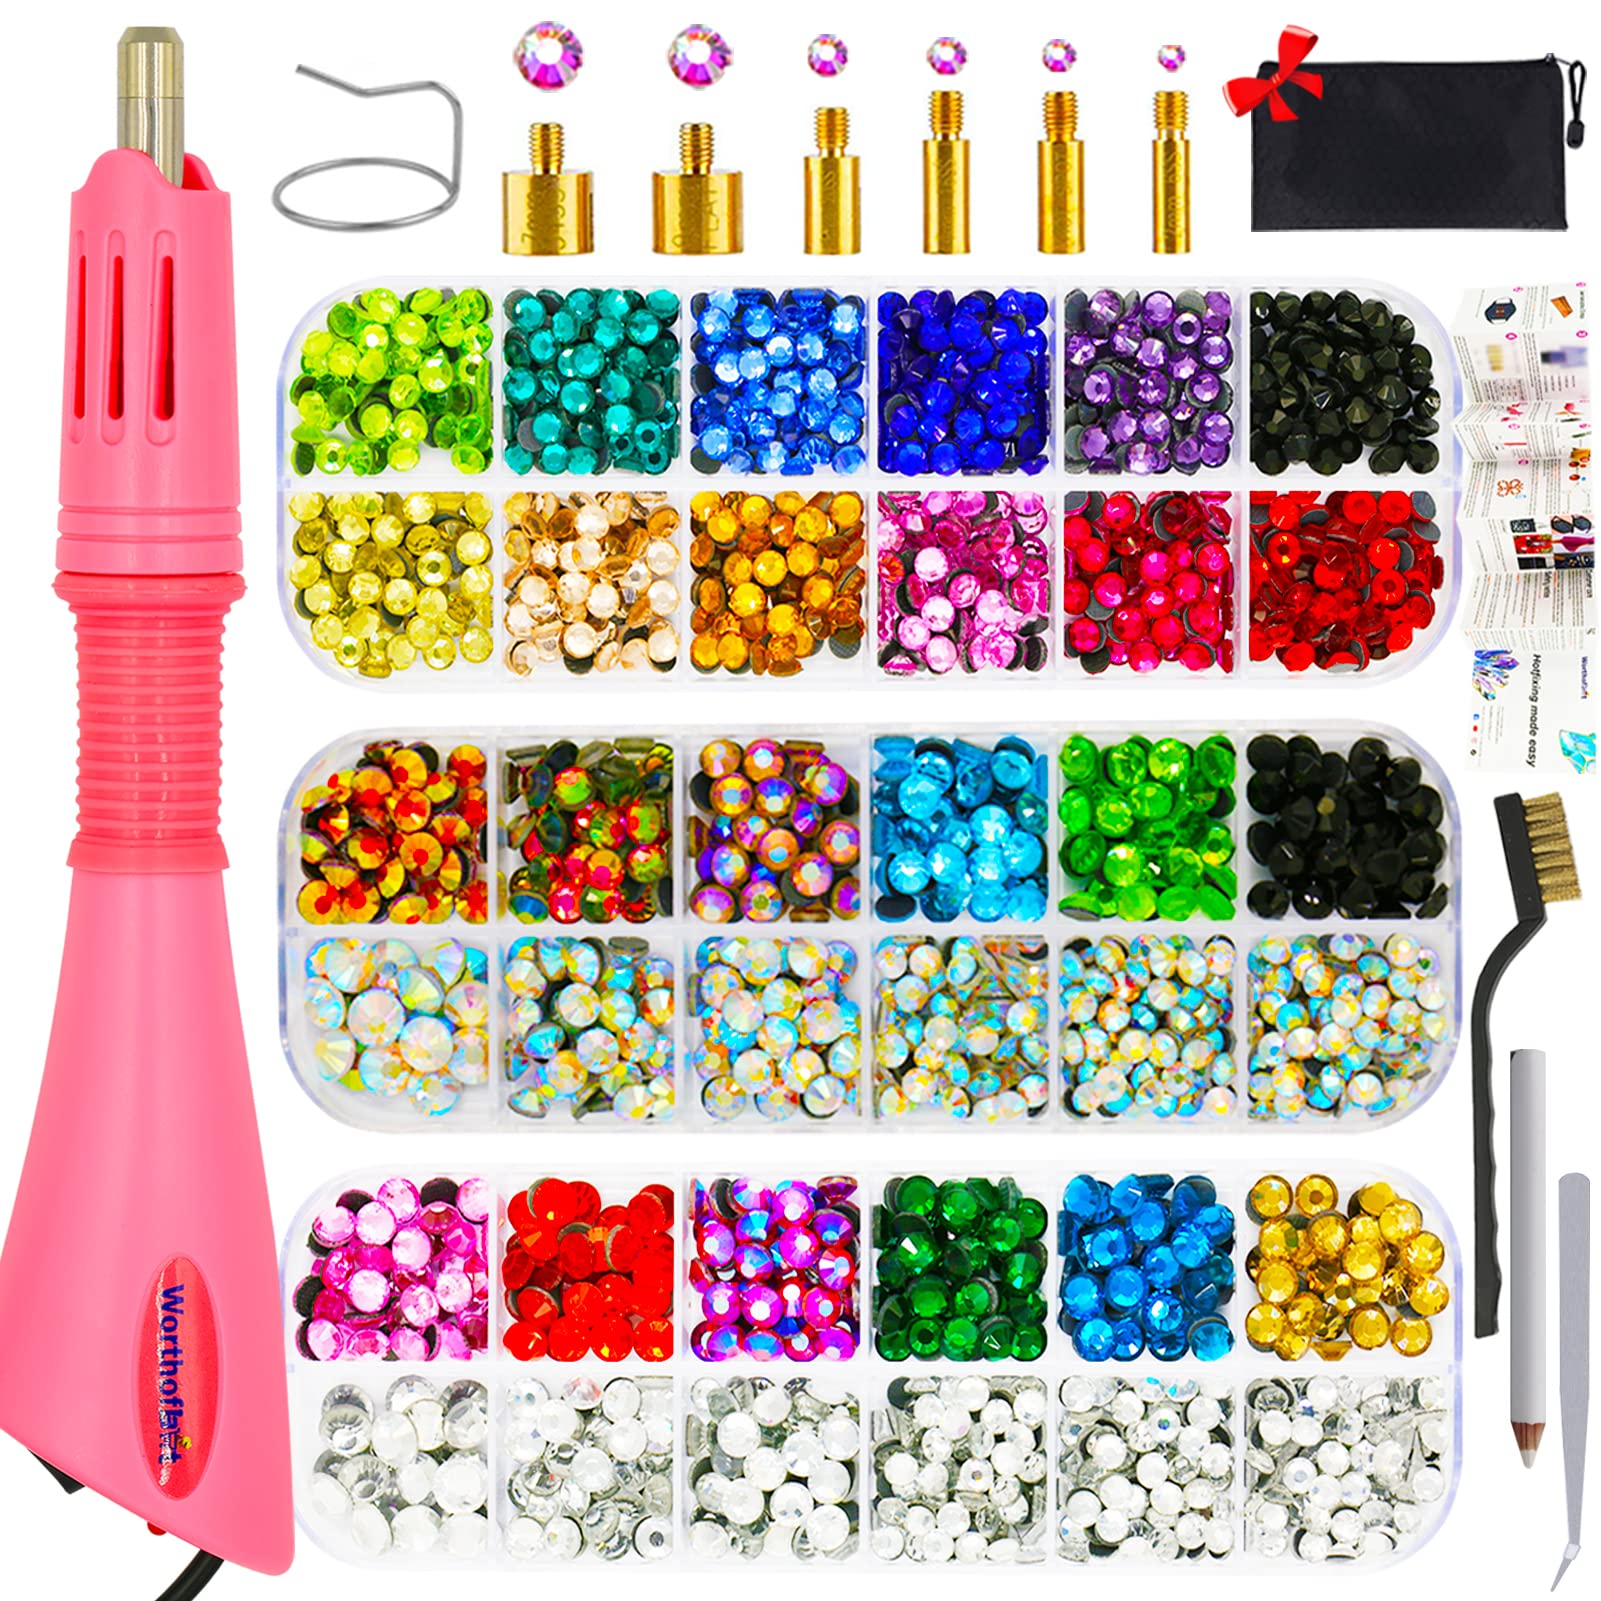 Rhinestone Setter, Applicator Toolkit, Hot Fixed Wand Bedazzler Kit,  4080pcs, Ab Crystal, Clear, 14 Colors, 7 Tips, 4 Gems Sizes, Tweezers, ,  Jewel Pi